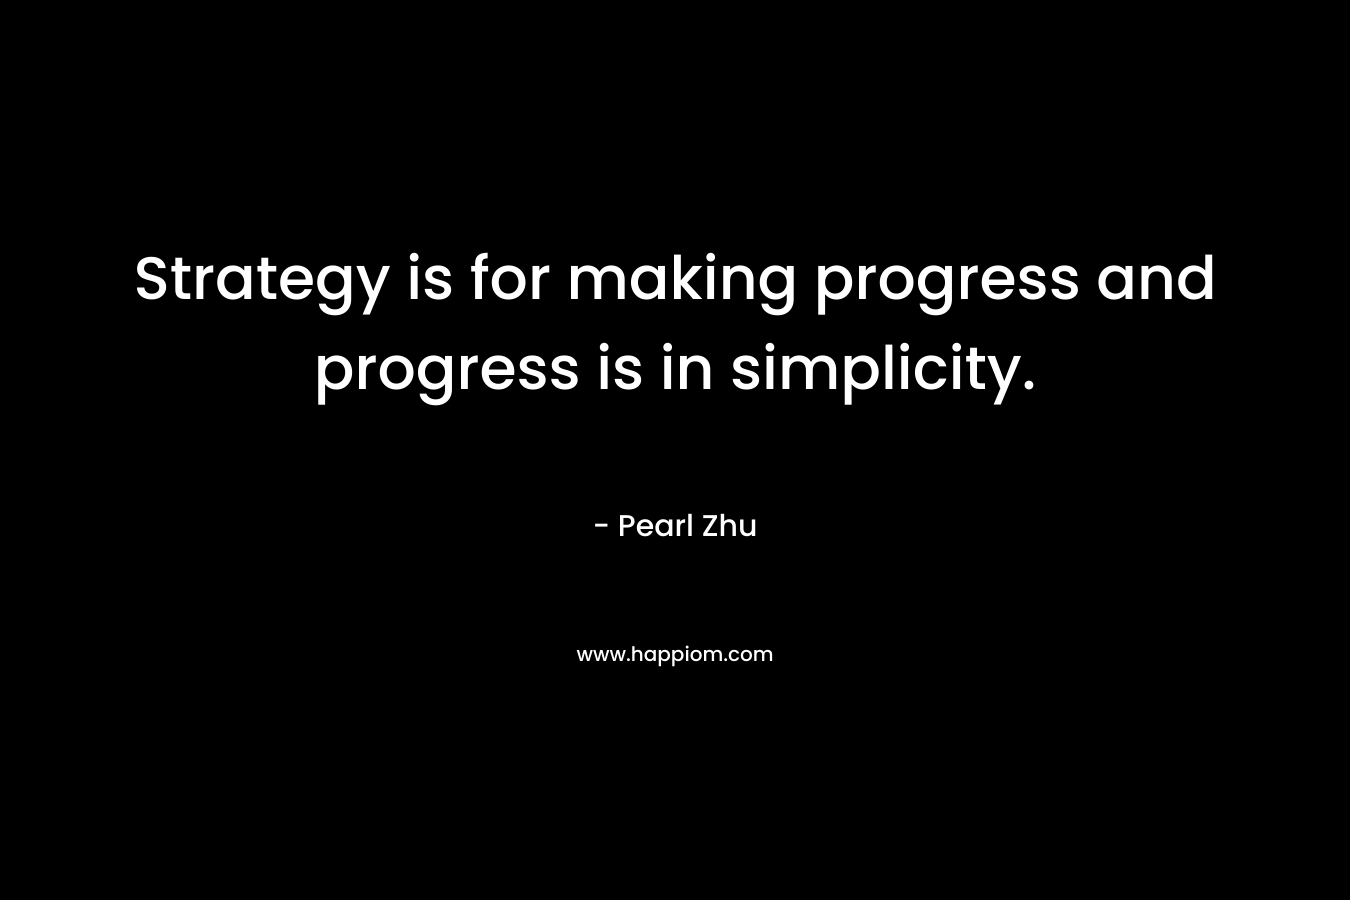 Strategy is for making progress and progress is in simplicity.